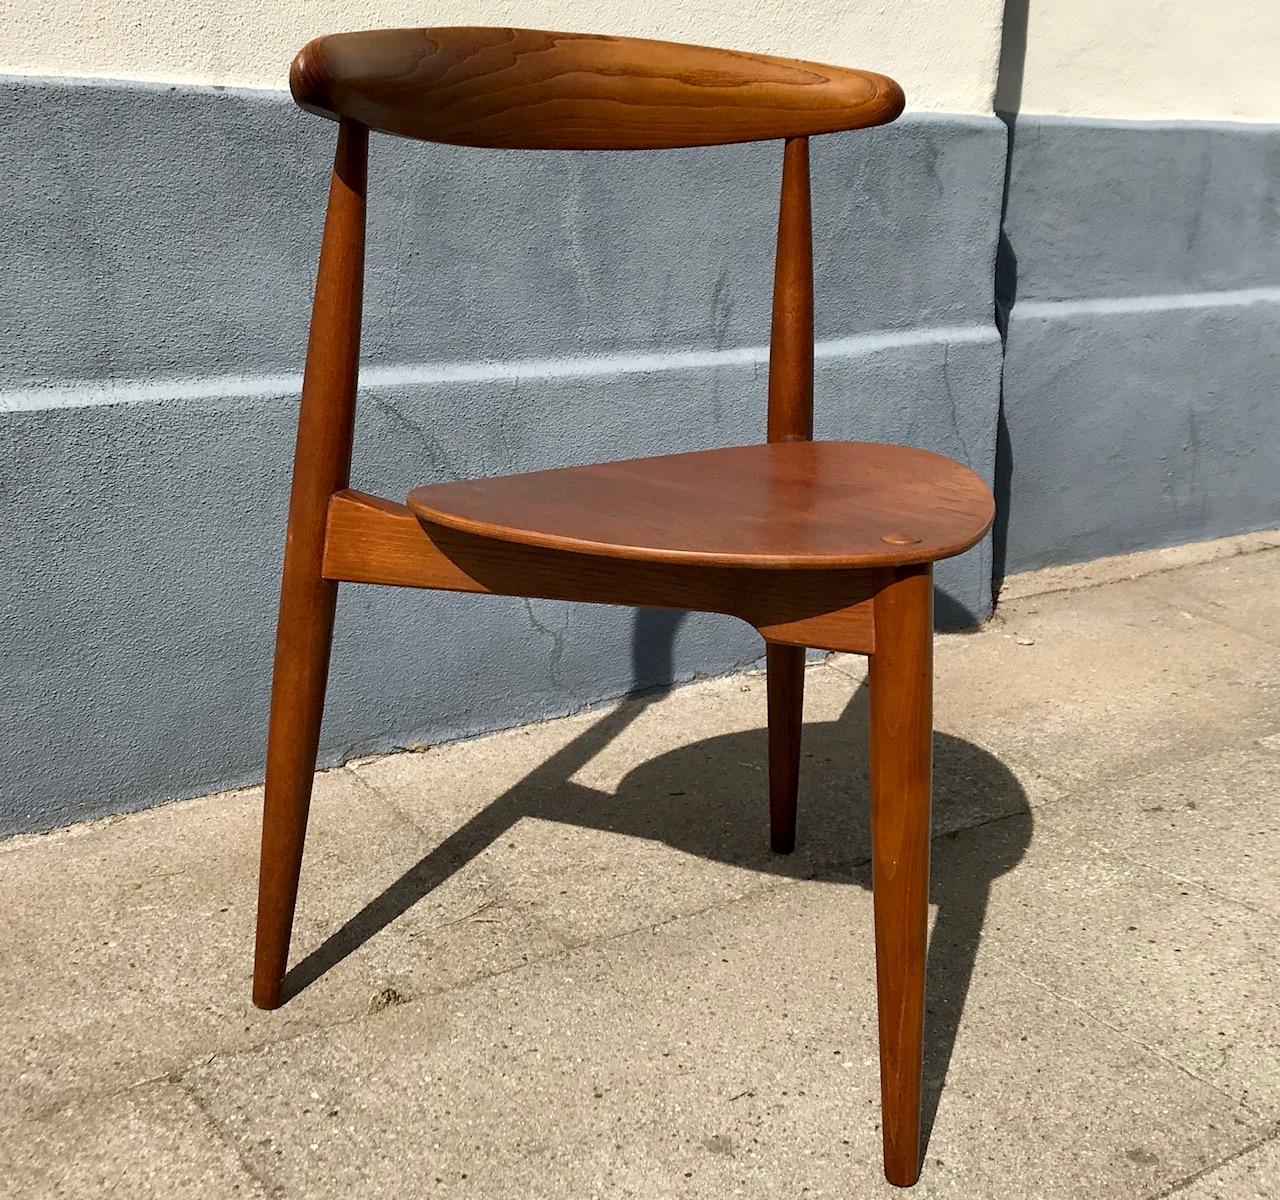 Hans J. Wegner single ‘Heart’ tripod chair. The seat is made from veneered teak, the frame from solid teak and backrest from danish oak. It was designed in 1952 and manufactured by Fritz Hansen. The model is also called FH 4103. Literature.